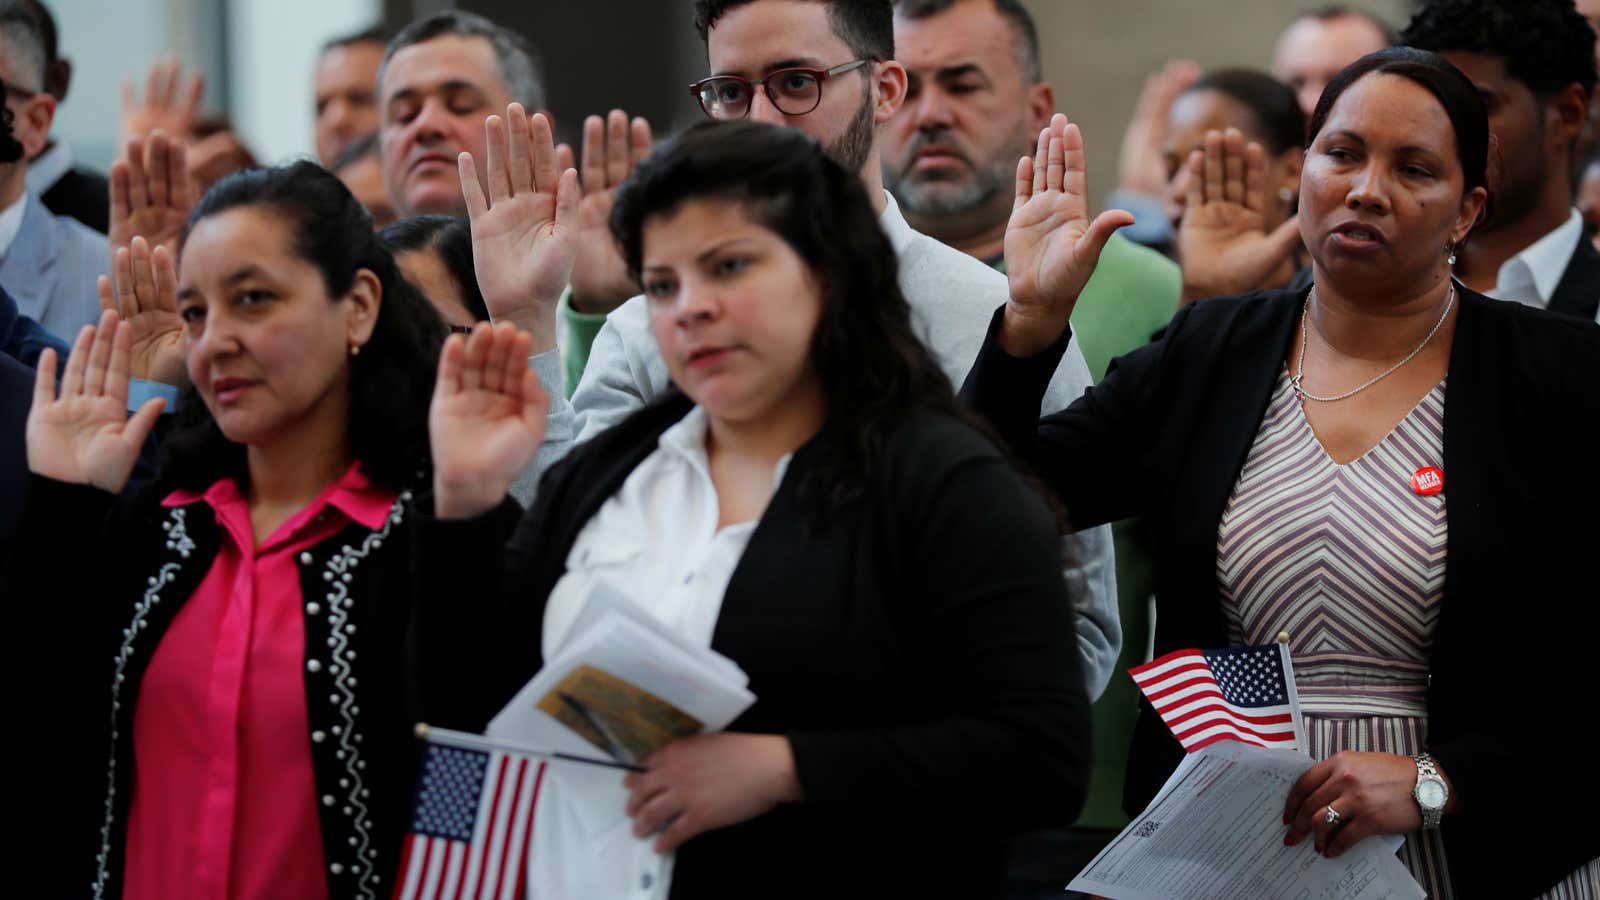 Immigrants take the Oath of Allegiance to become a U.S. citizens during an official Naturalization Ceremony at the Museum of Fine Arts, Boston in Boston, Massachusetts, U.S., May 6, 2019.   REUTERS/Brian Snyder – RC1FAA5D2010